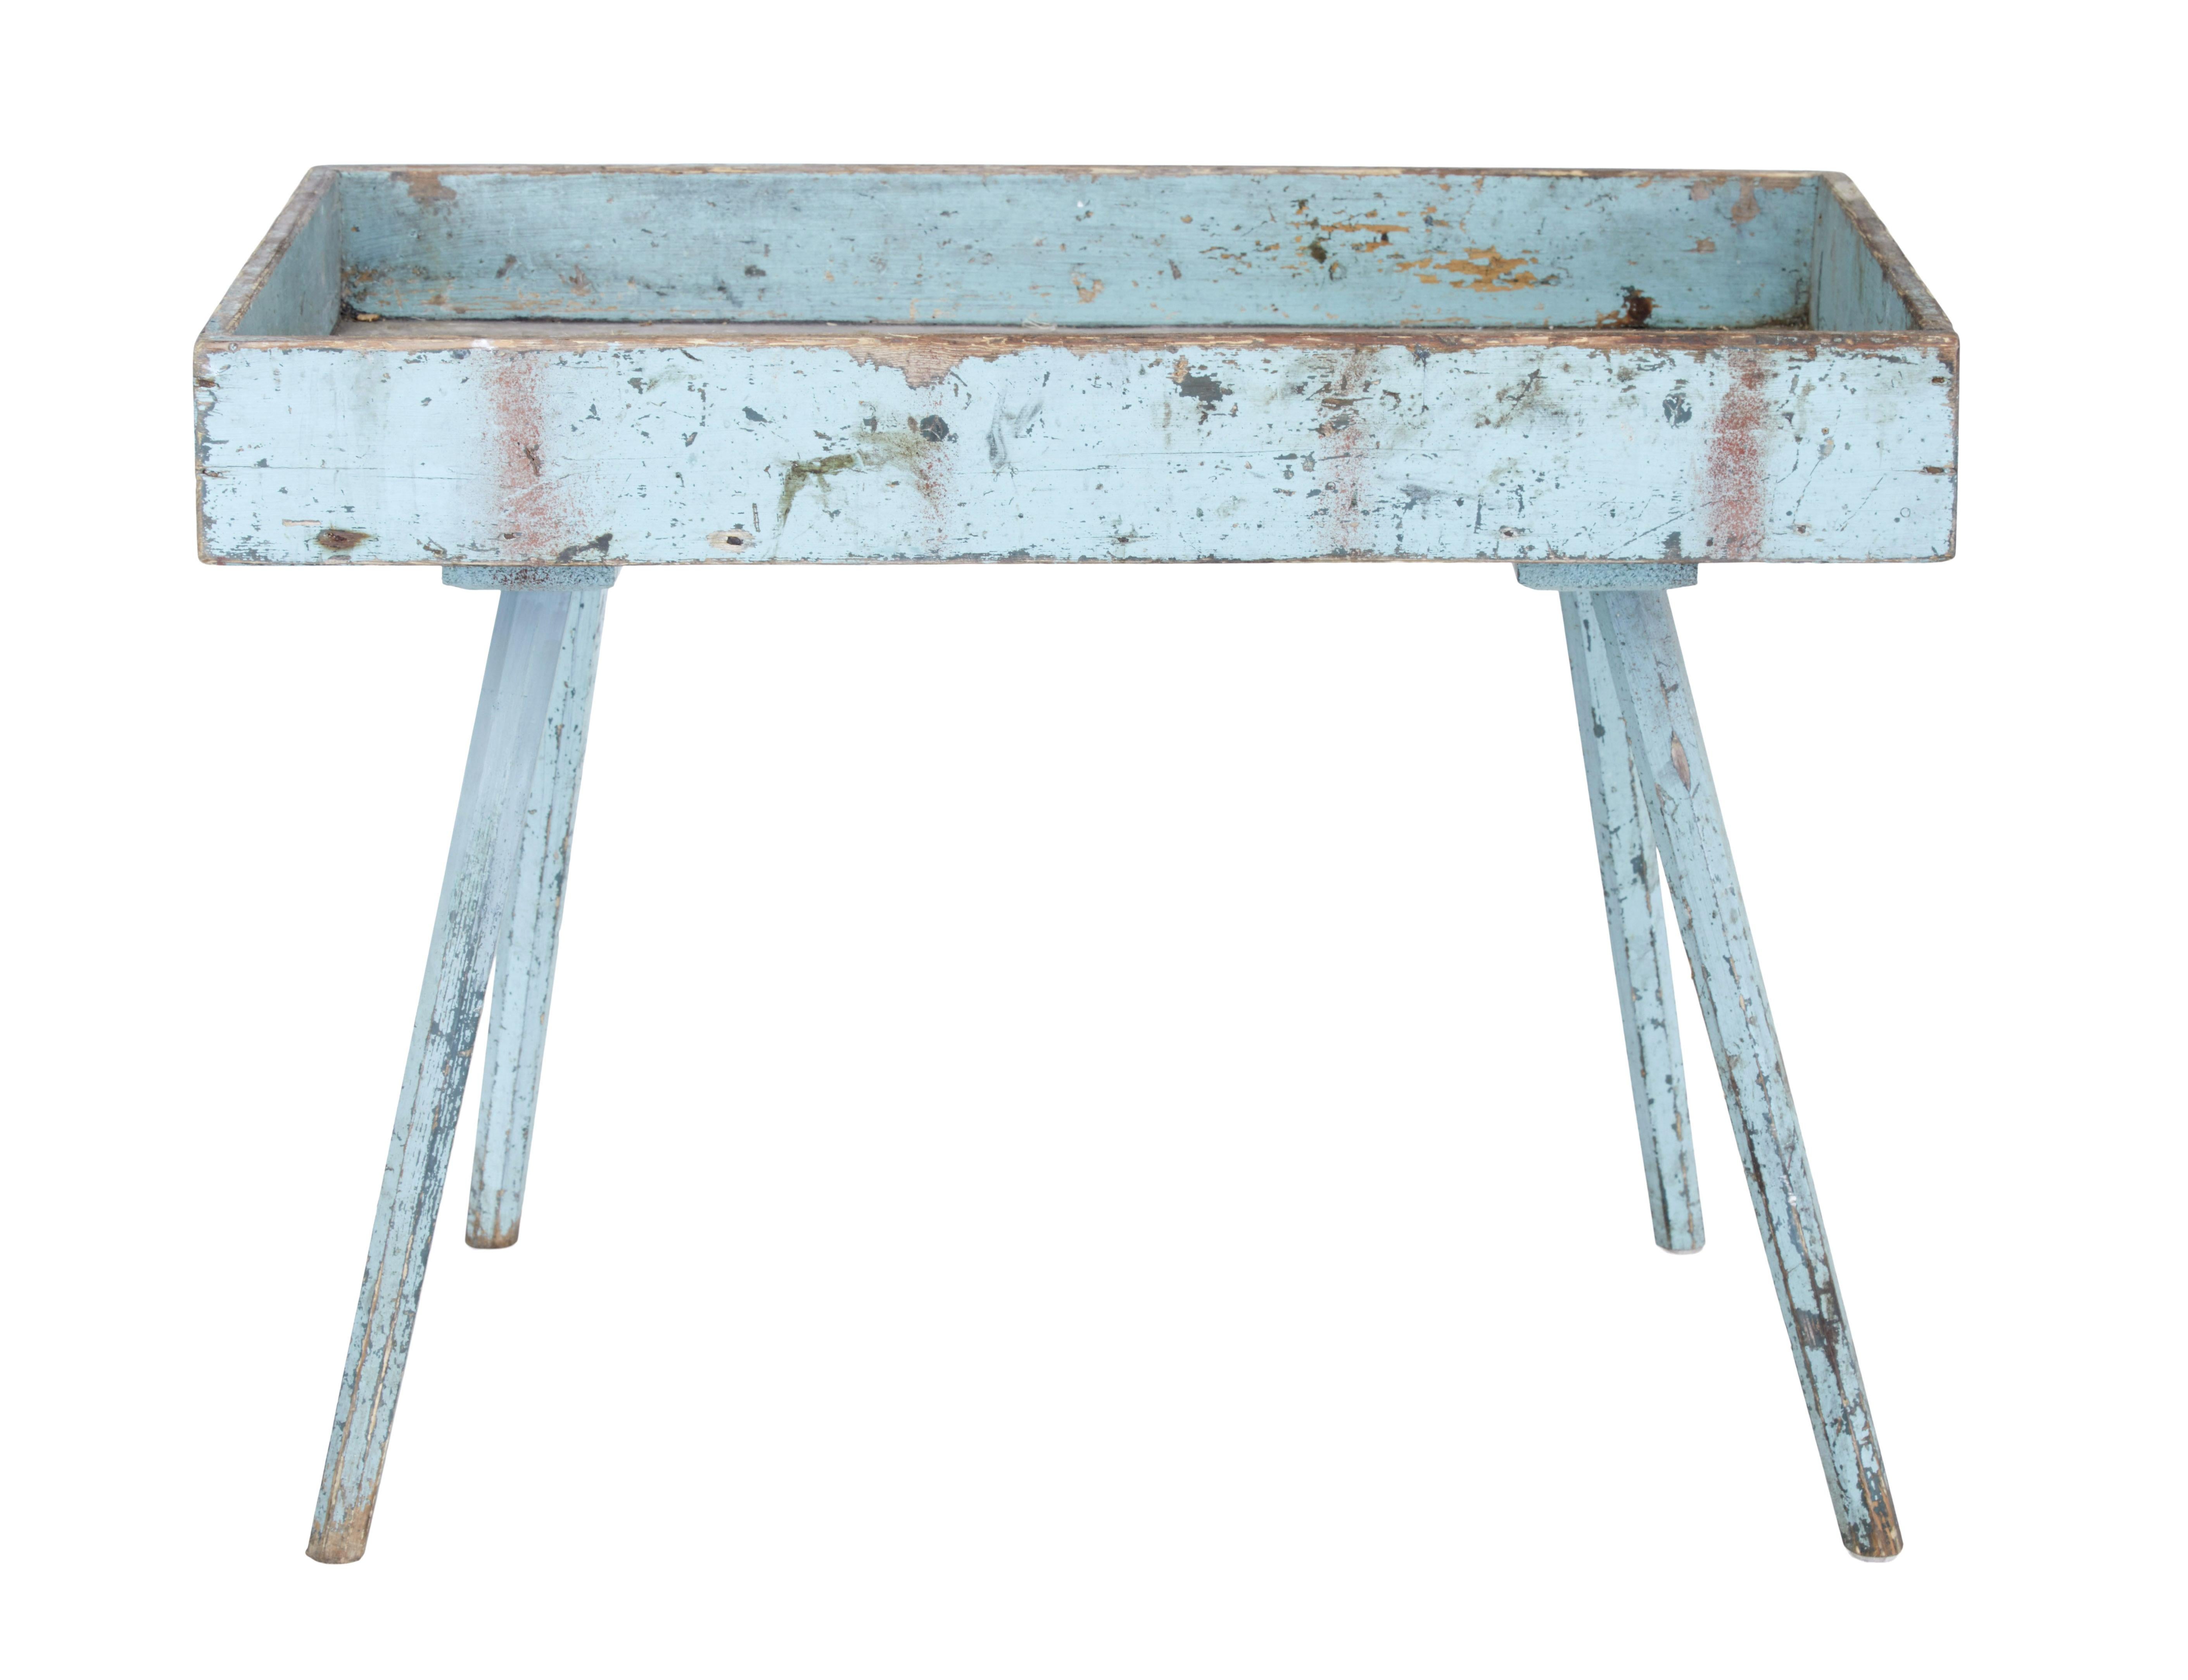 19th Century Rustic Painted Pine Garden Room Tray Table In Fair Condition For Sale In Debenham, Suffolk